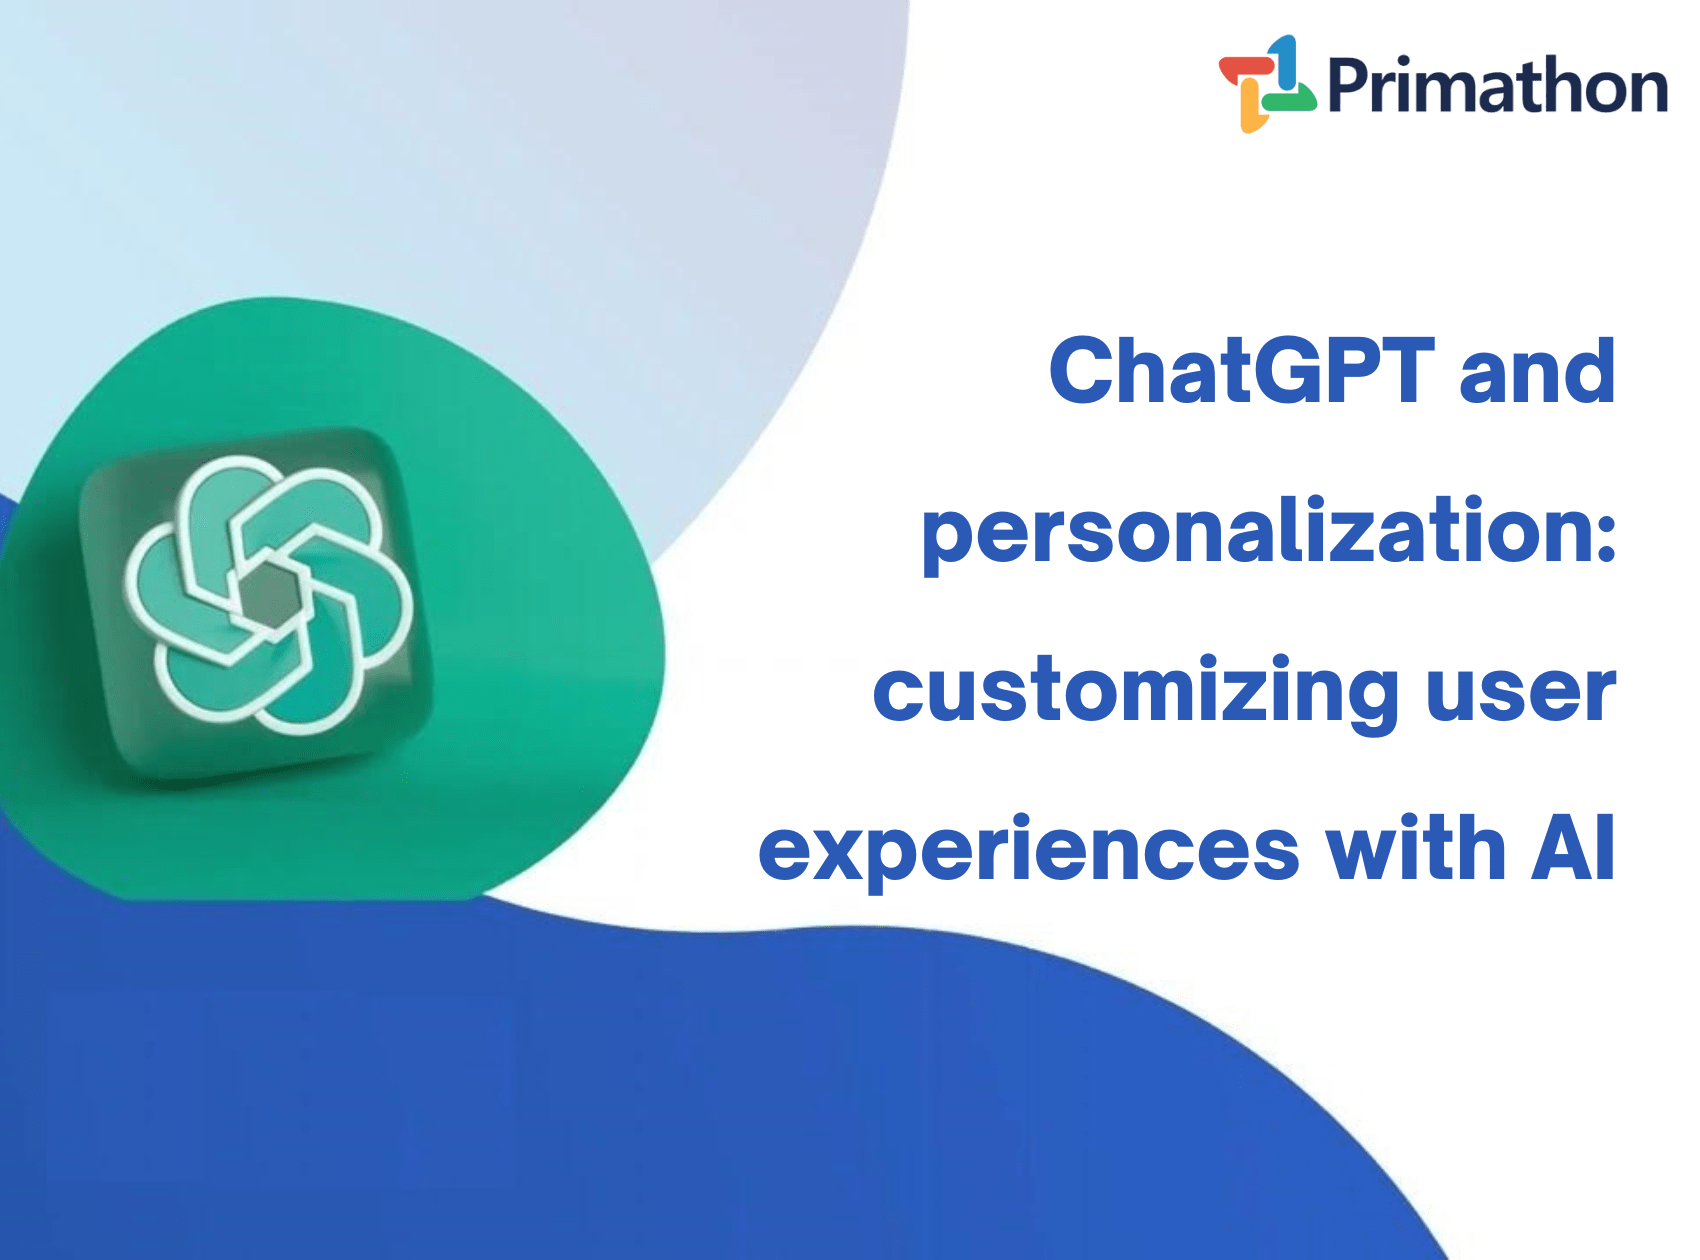 ChatGPT and personalization: customizing user experiences with AI